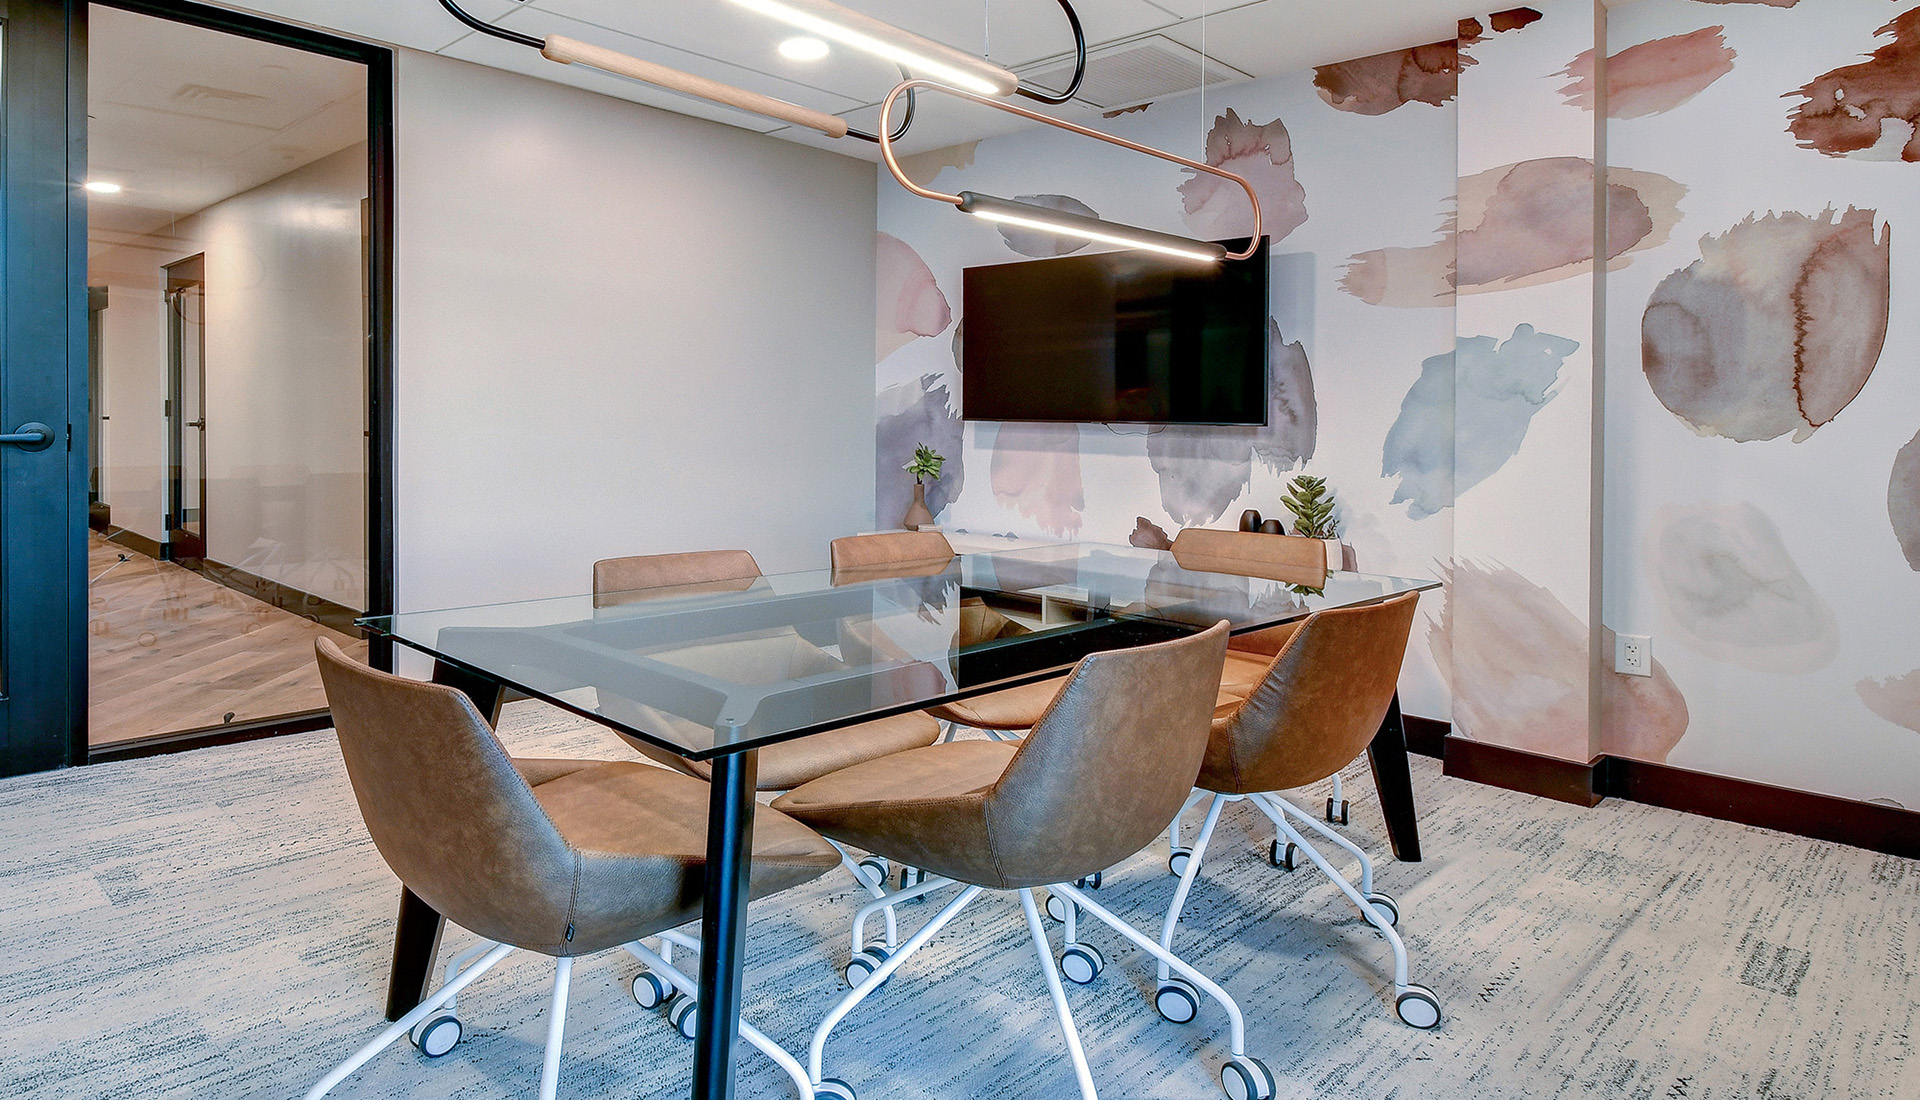 Conference room with glass table, brown leather office chairs, and tv